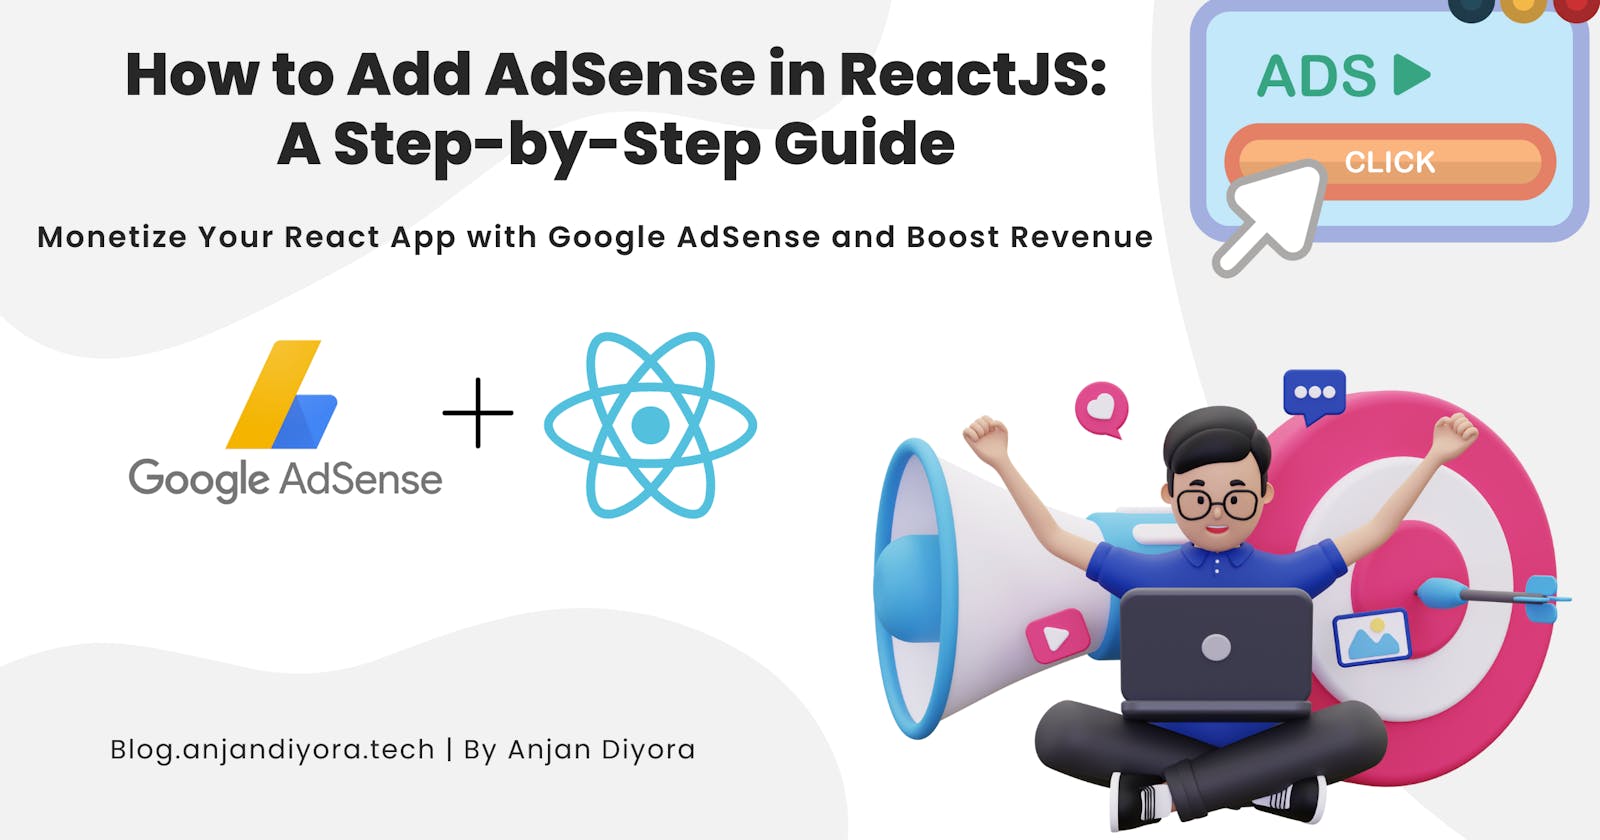 How to Add AdSense in ReactJS: A Step-by-Step Guide with Code and Best Practices